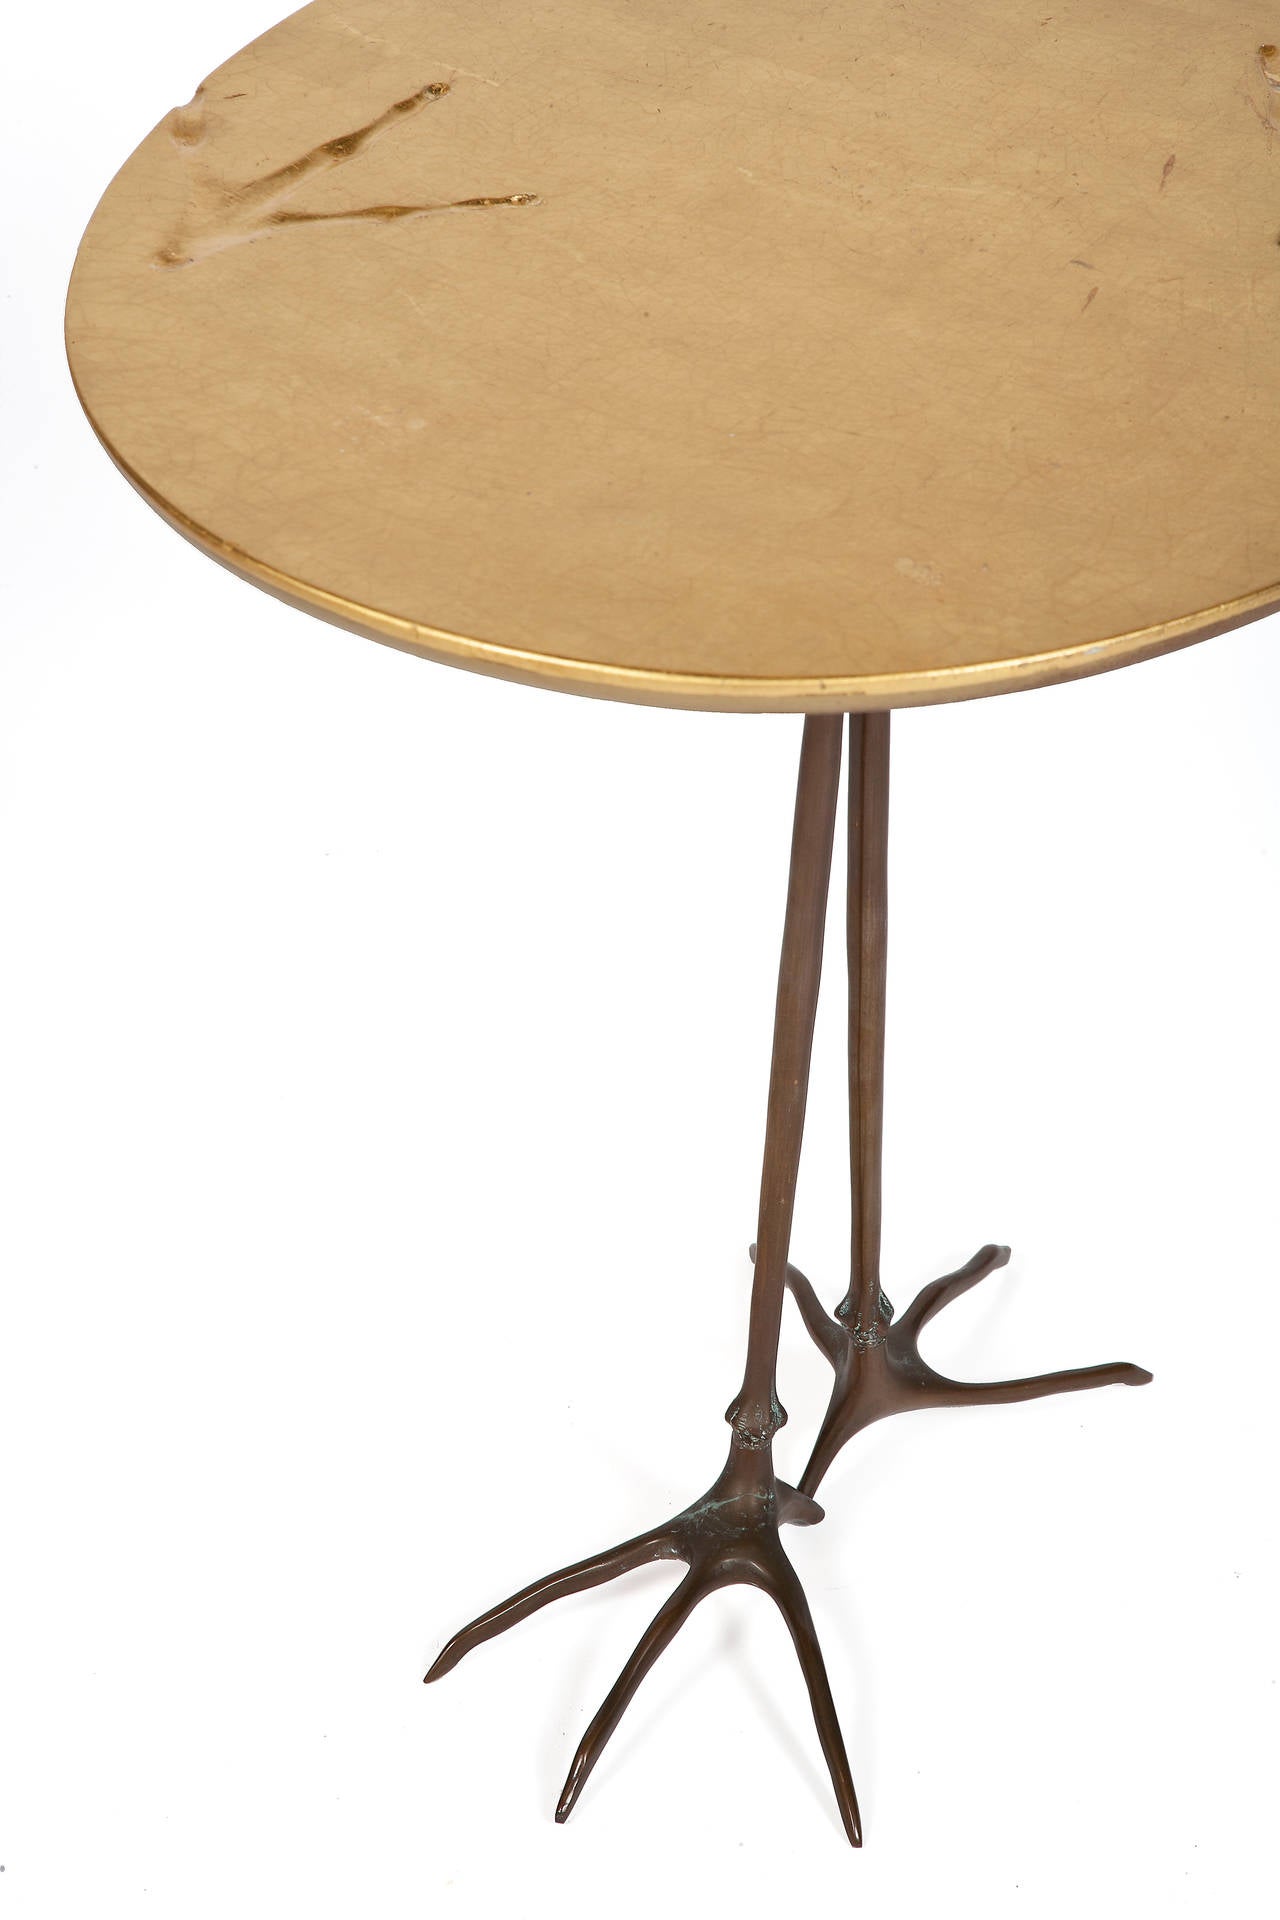 Surrealist sculptural oval table with a gold leafed top on bronze legs.
From the 1936 model by Meret Oppenheim, it was produced by Gavina as part of the 'Ultramobile' collection.